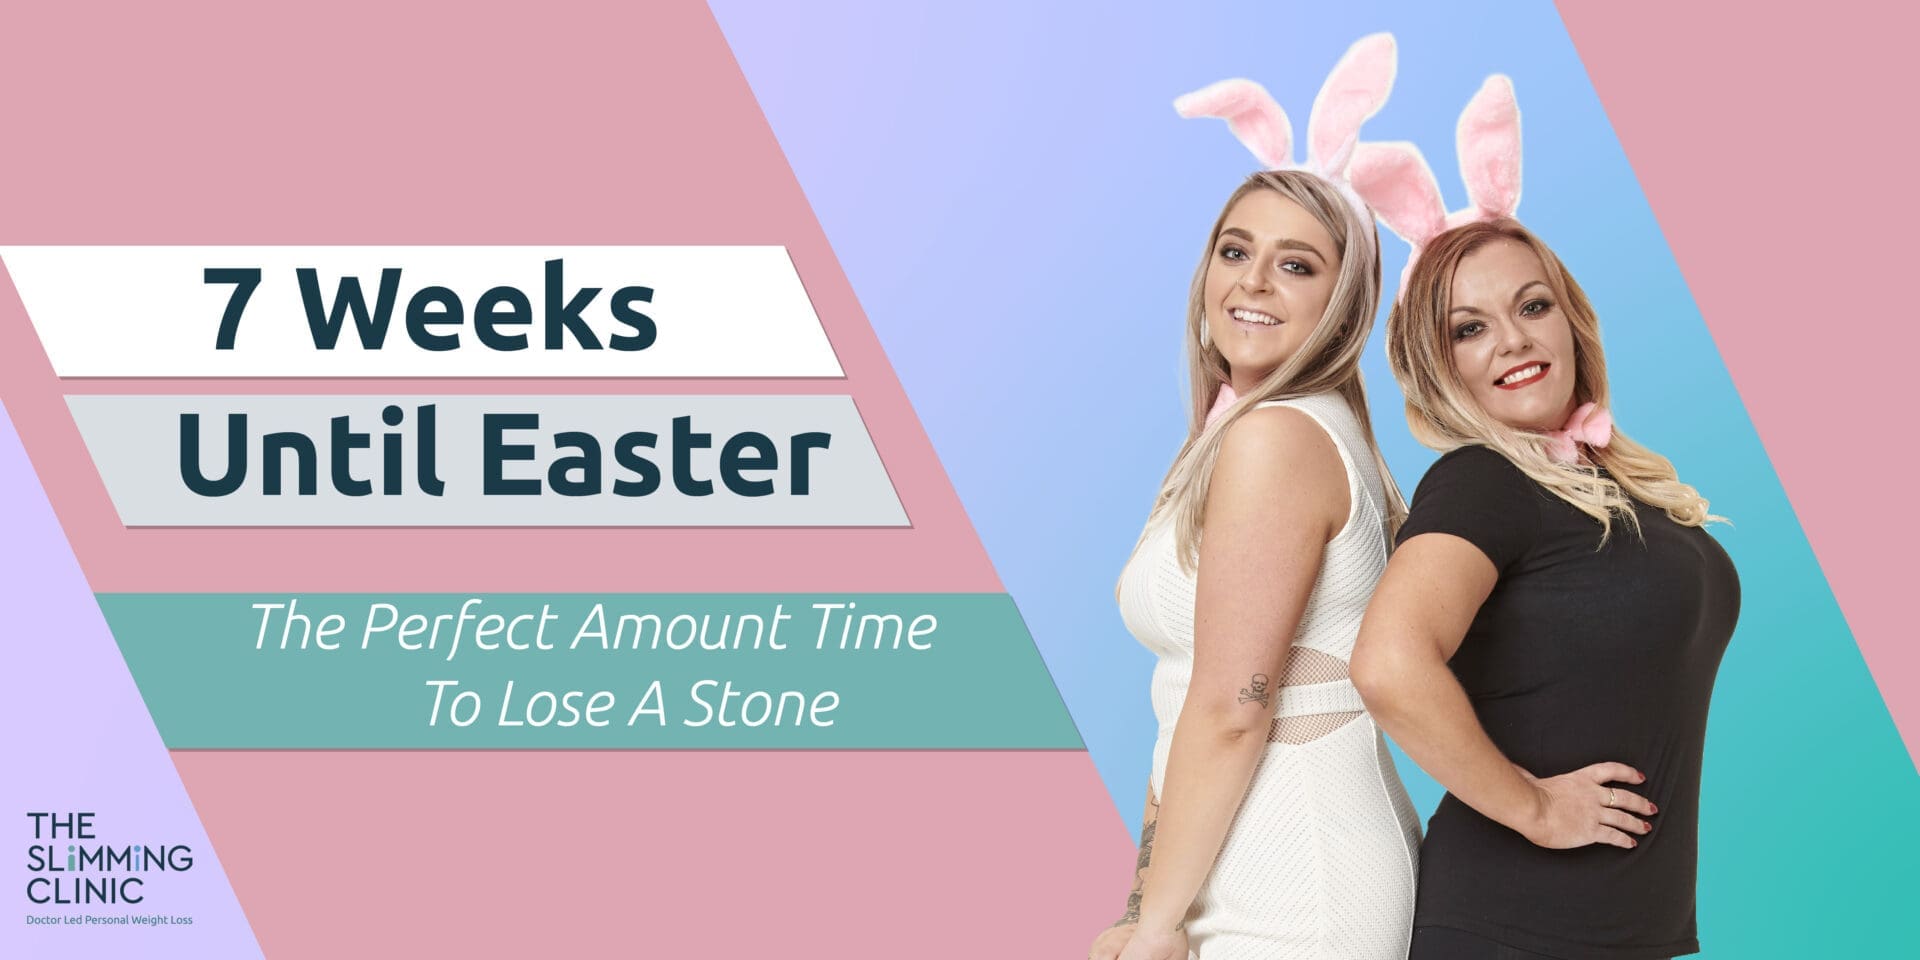 7 Weeks Until Easter – The Perfect Amount Time To Lose A Stone